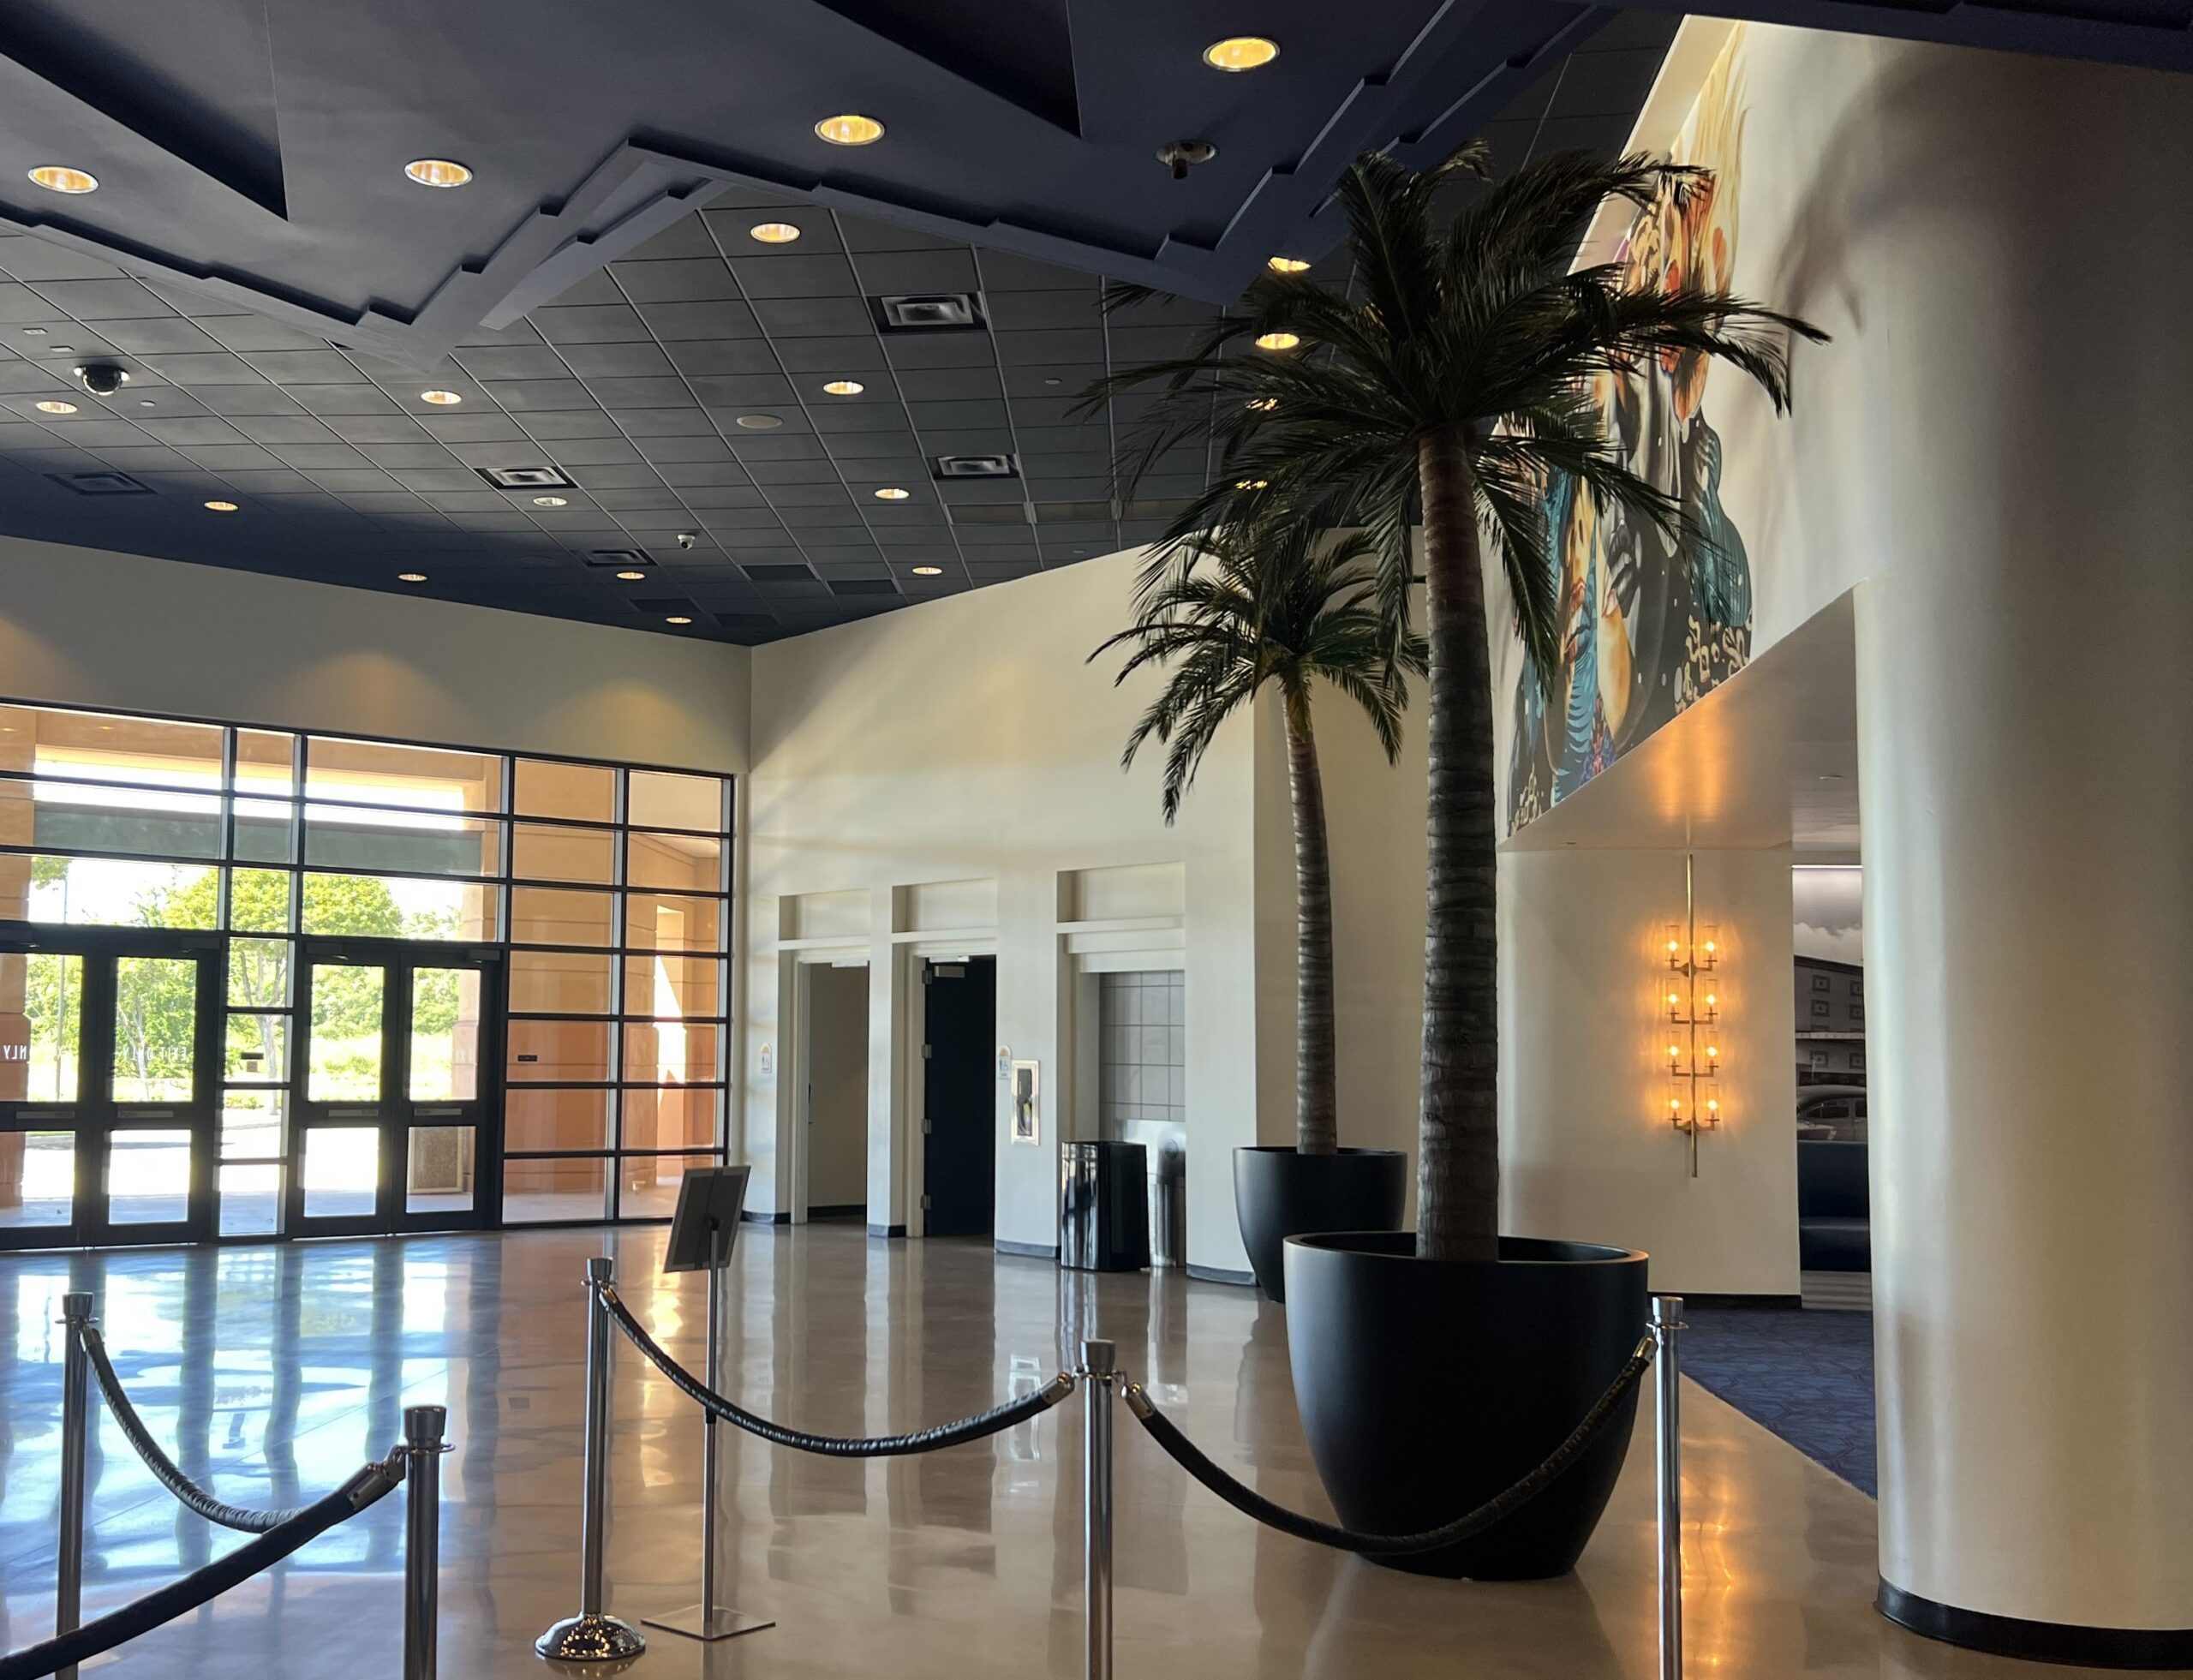 Consolidated Theatres Kapolei Palm Trees lobby entrance view